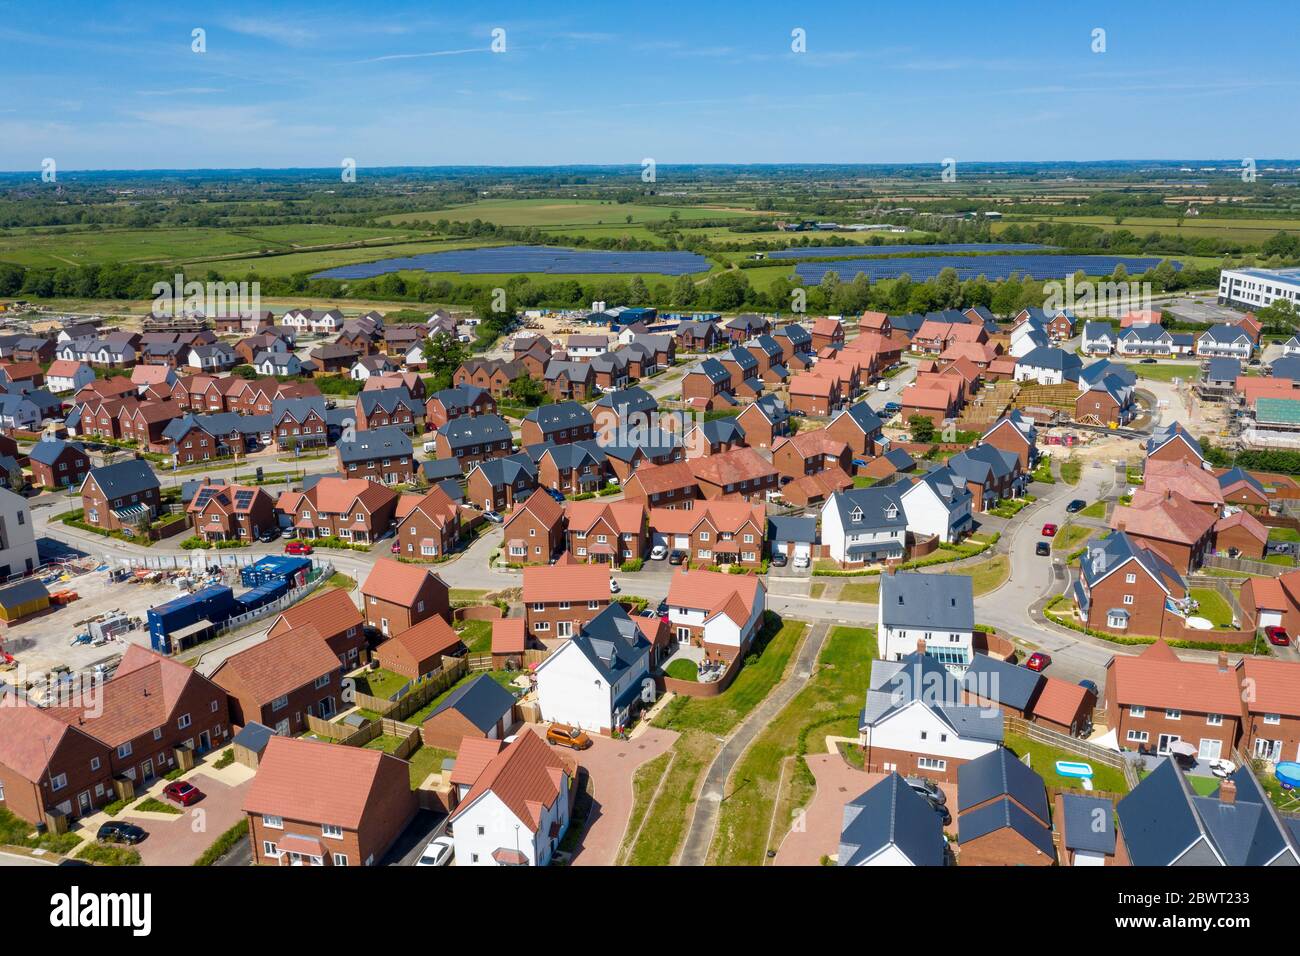 Aerial view of new Tadpole Garden Village in north Swindon, England Stock Photo